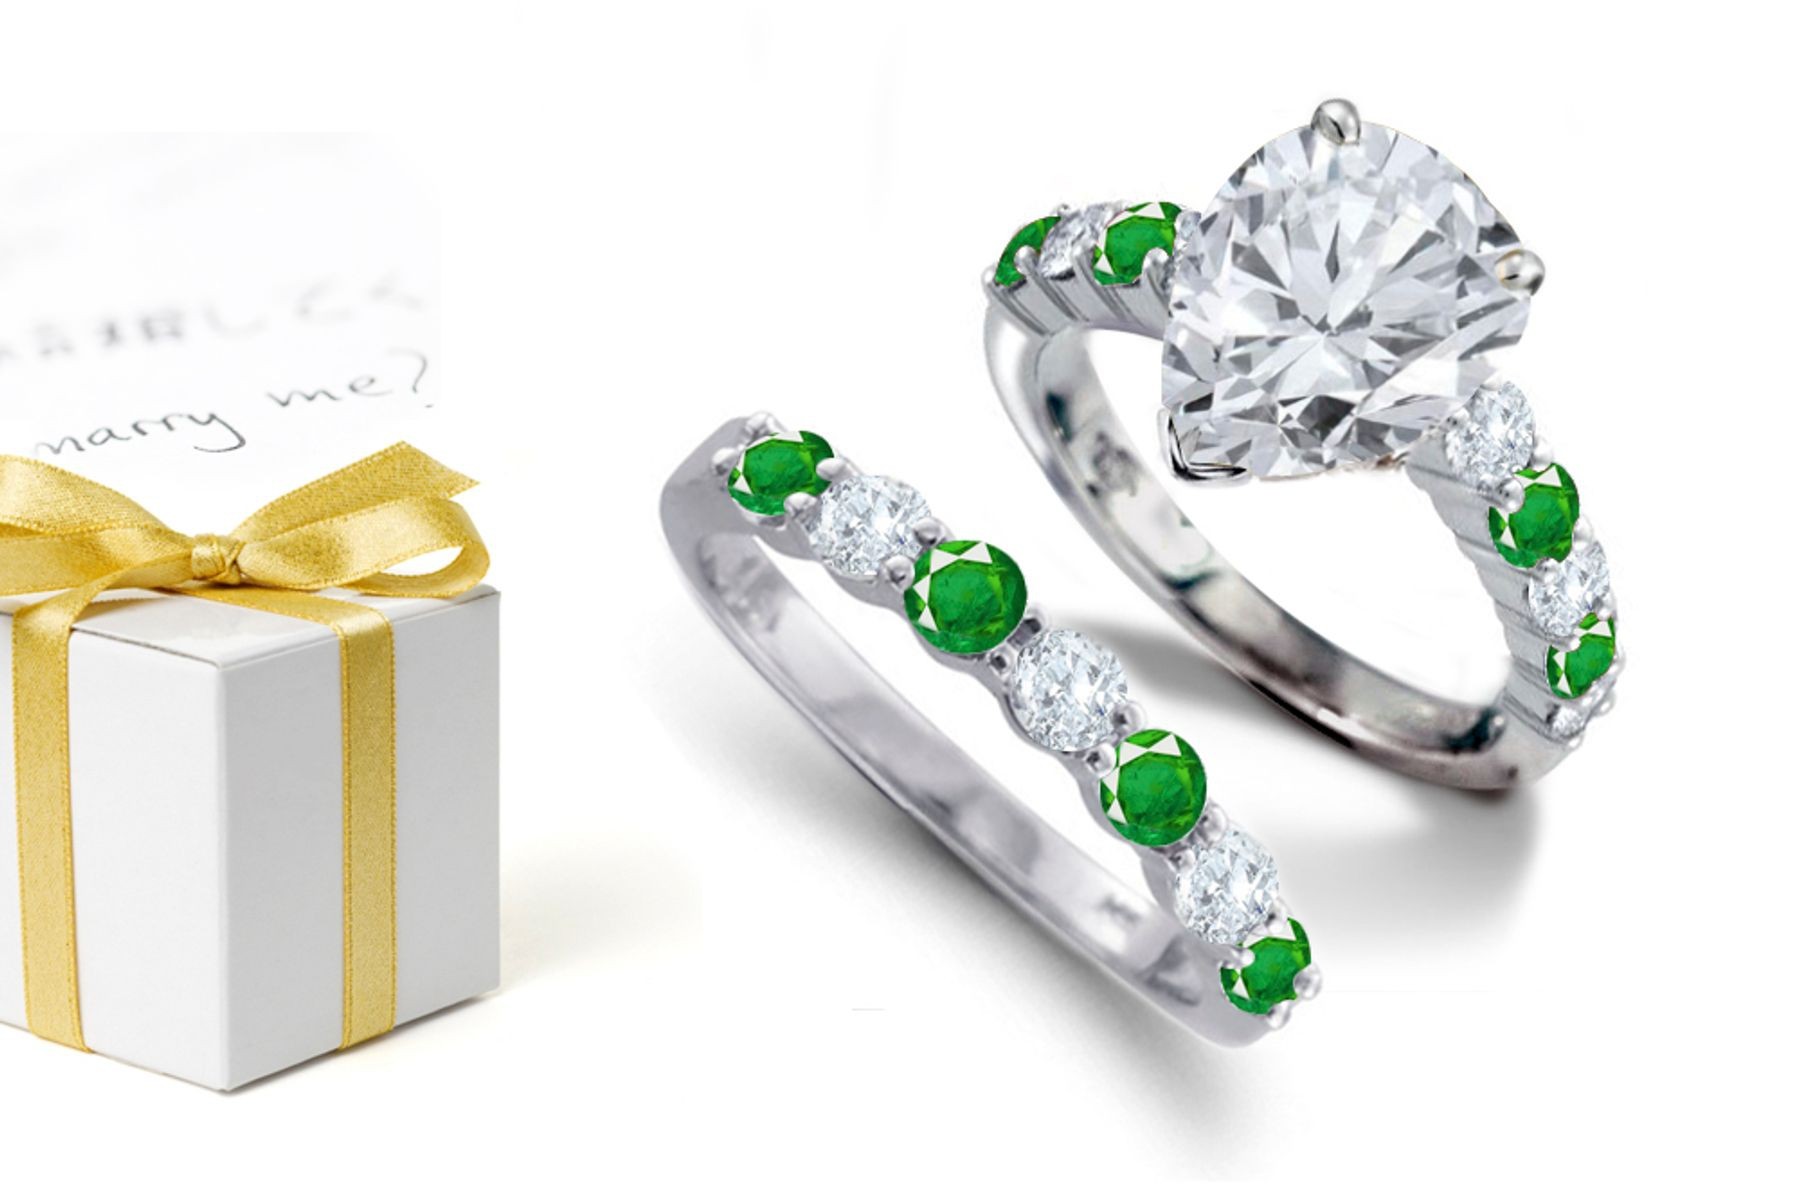 Faith, Hope, & Charity: Line of Richly Created Center Pears Featuring Diamond, Emerald & Platinum Ring & Emerald & Diamond Made in America